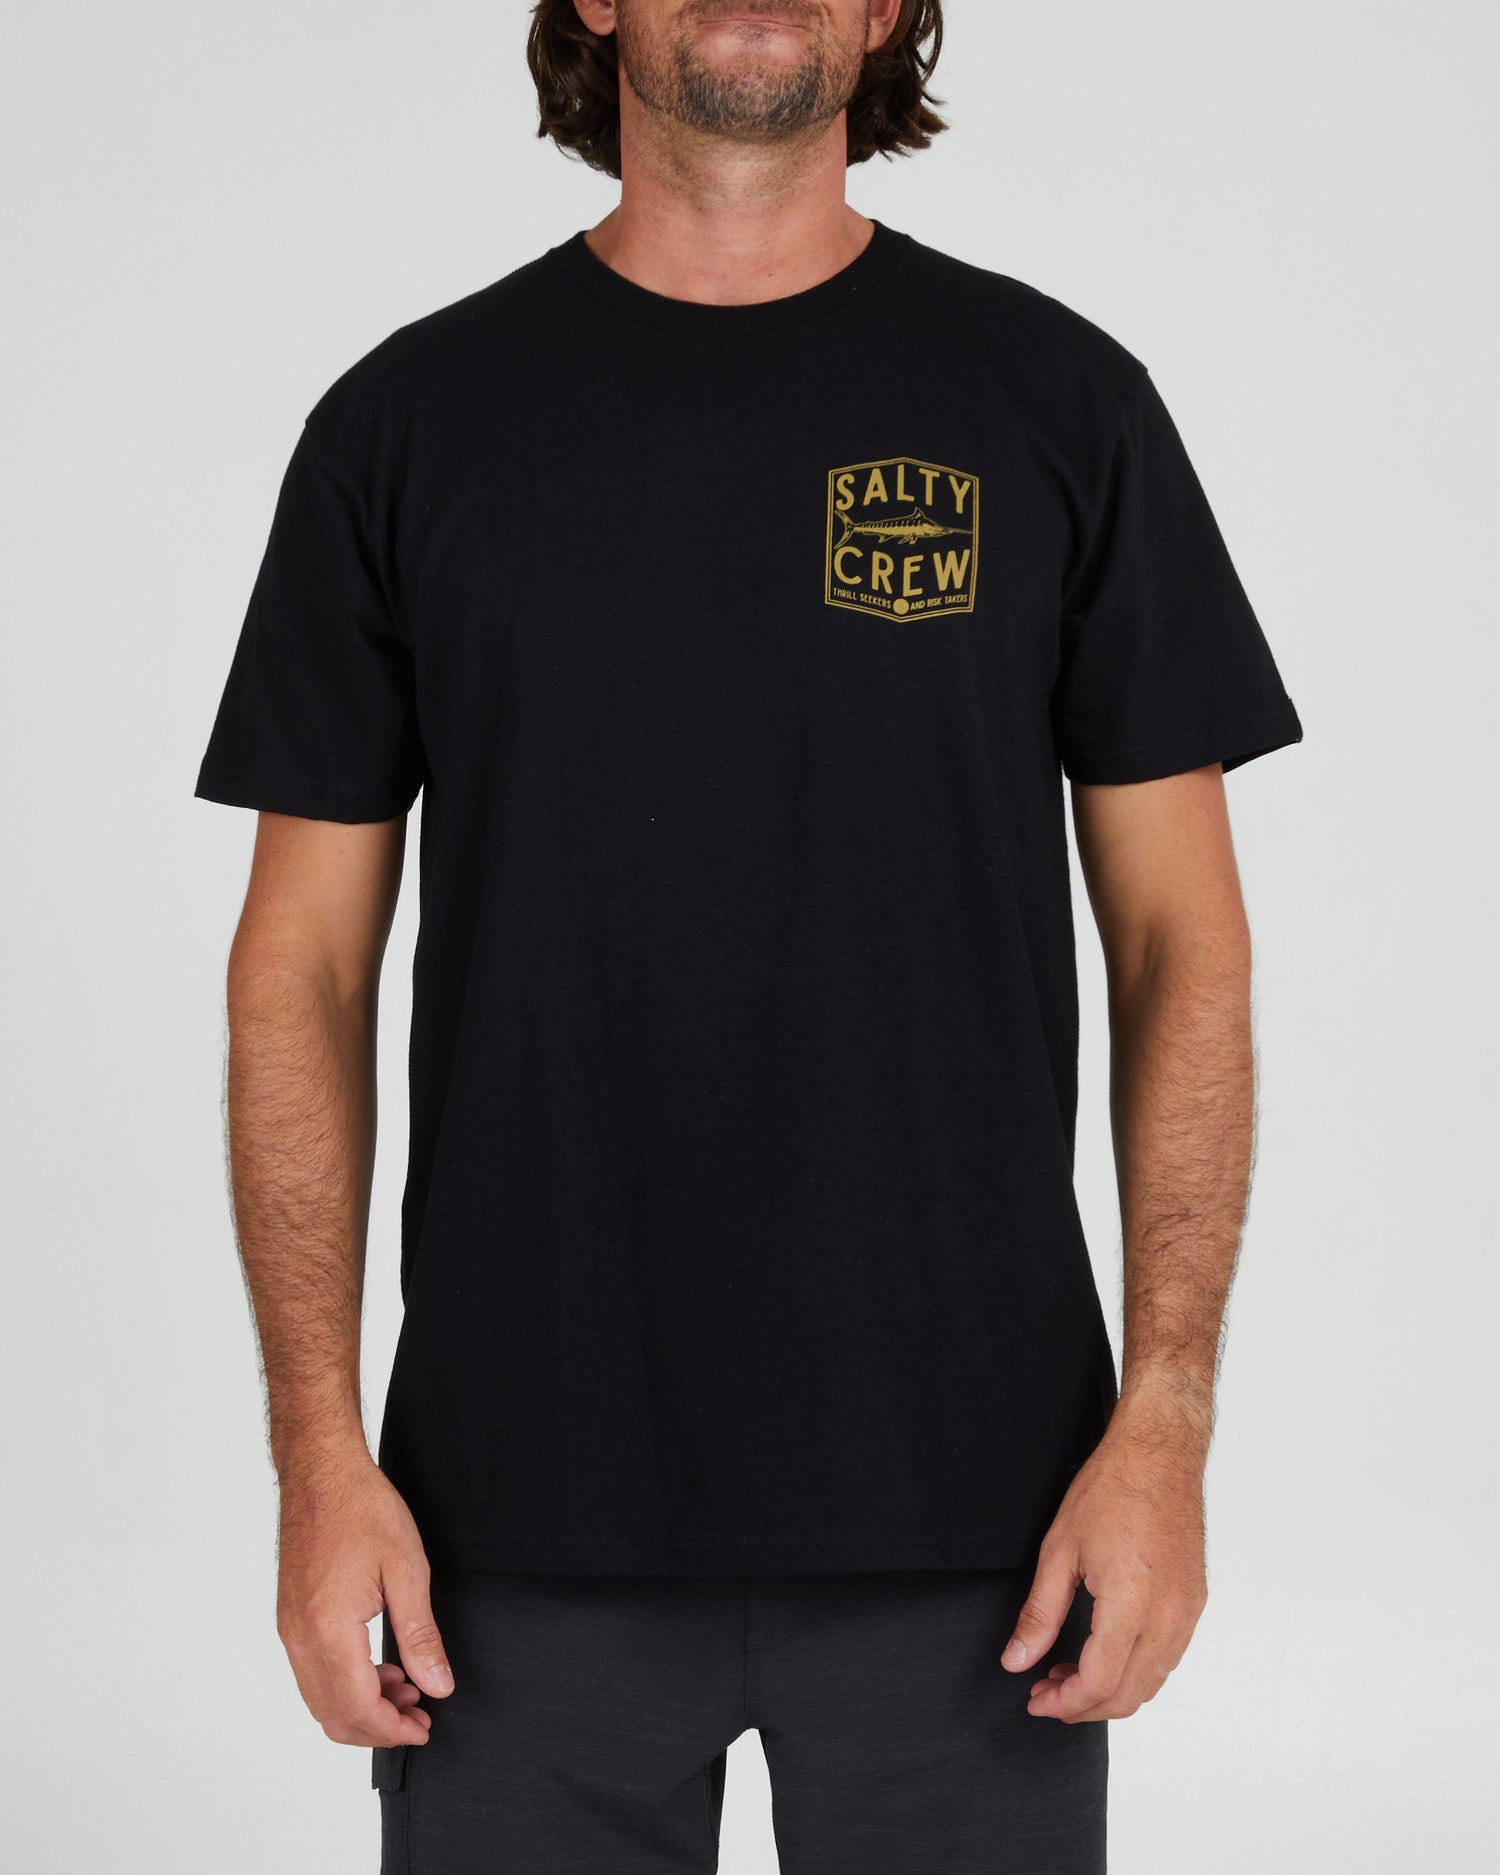 On body front of the Fishery Black S/S Standard Tee